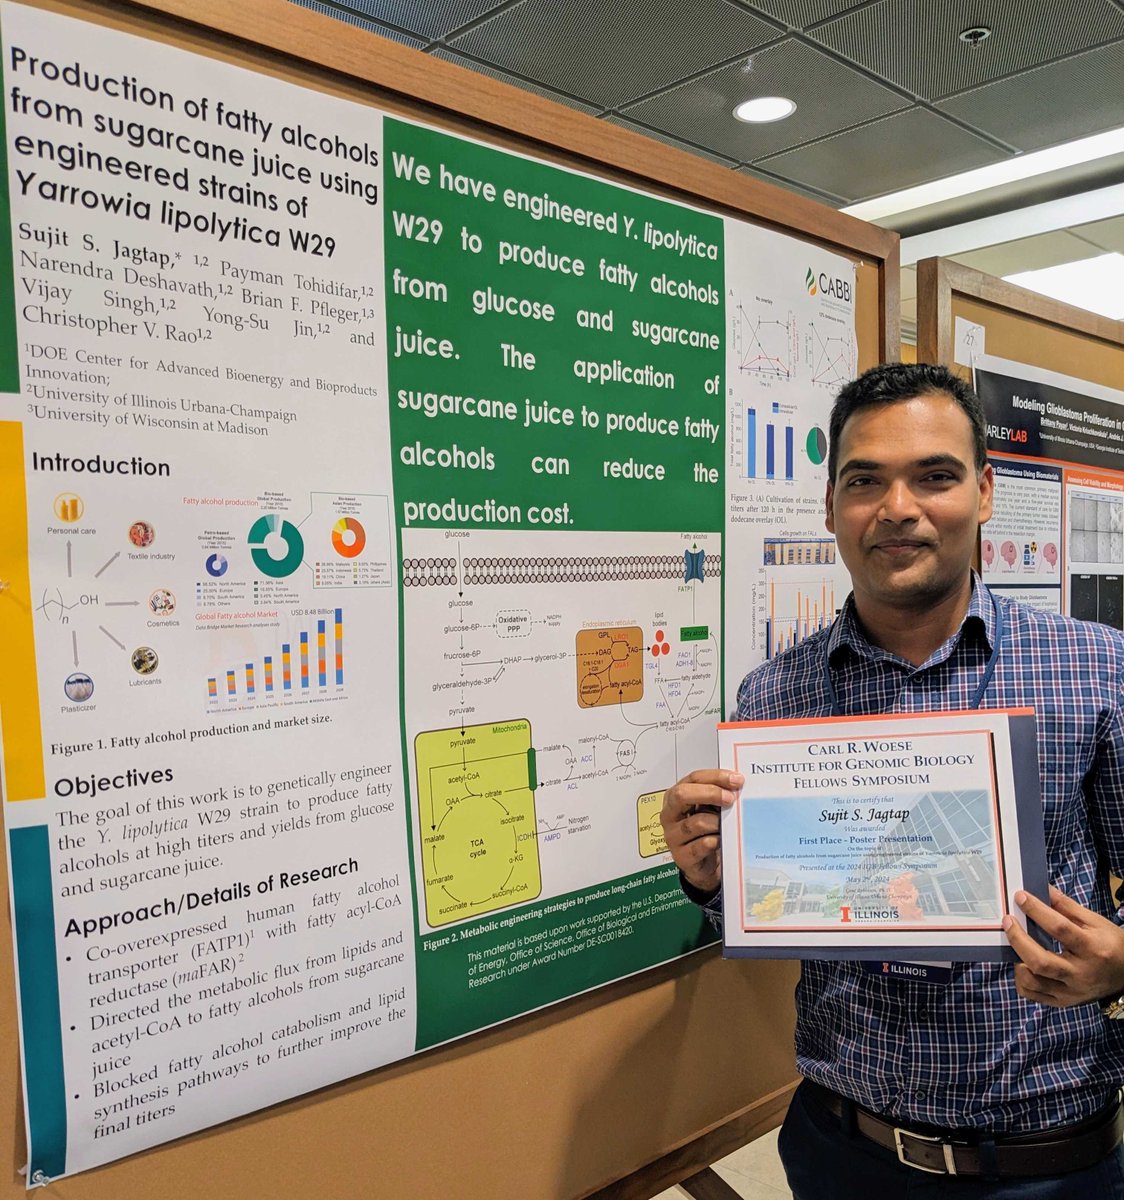 Congratulations to CABBI #Conversion Postdoc @sujit_jagtap1 of @ChBEIllinois for taking 1st place in the @IGBIllinois poster contest! 🥇 His work involves engineering #yeast to produce fatty alcohols from glucose and sugarcane juice! 🦠